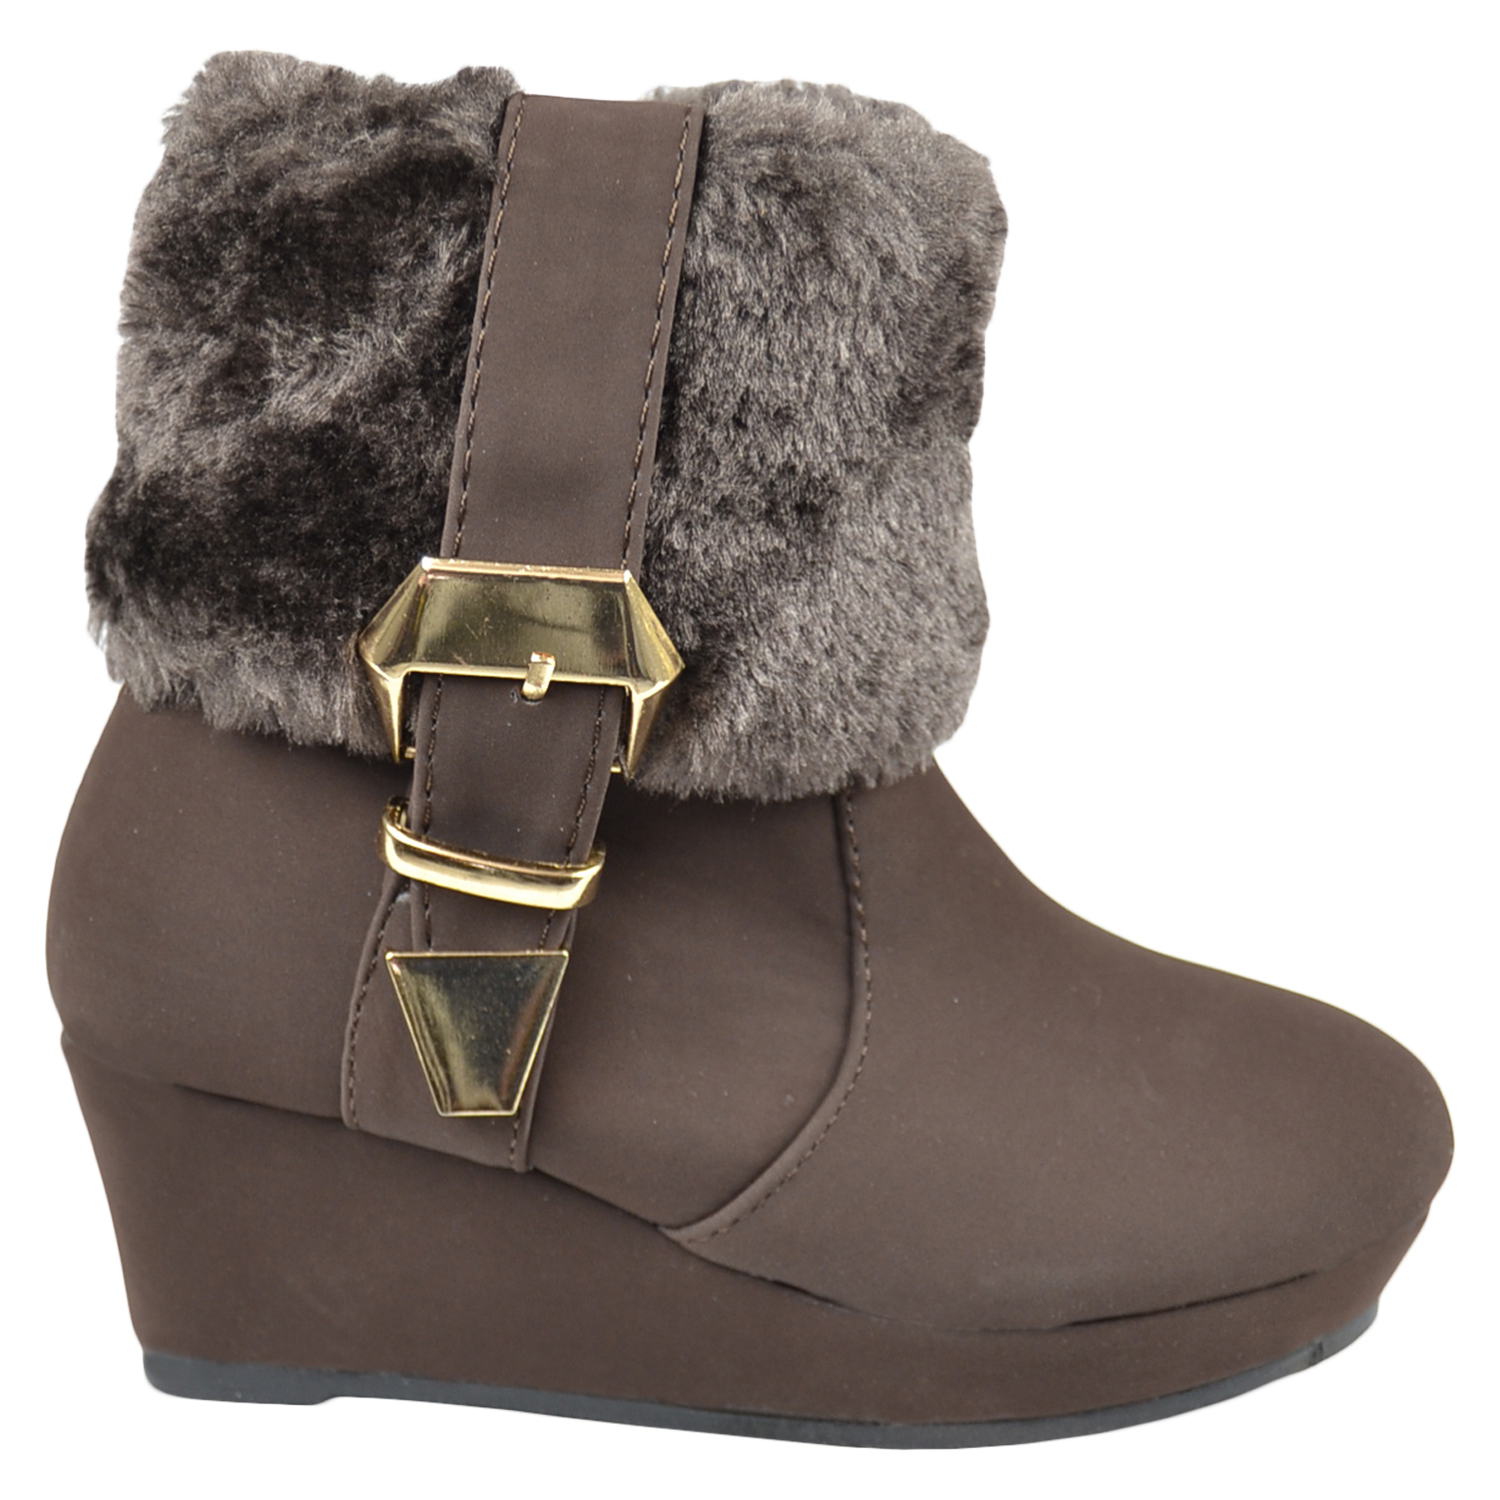 Generation Y Girl's Ankle Boots Fur Cuff Gold Buckle Accent Wedge Heel Booties